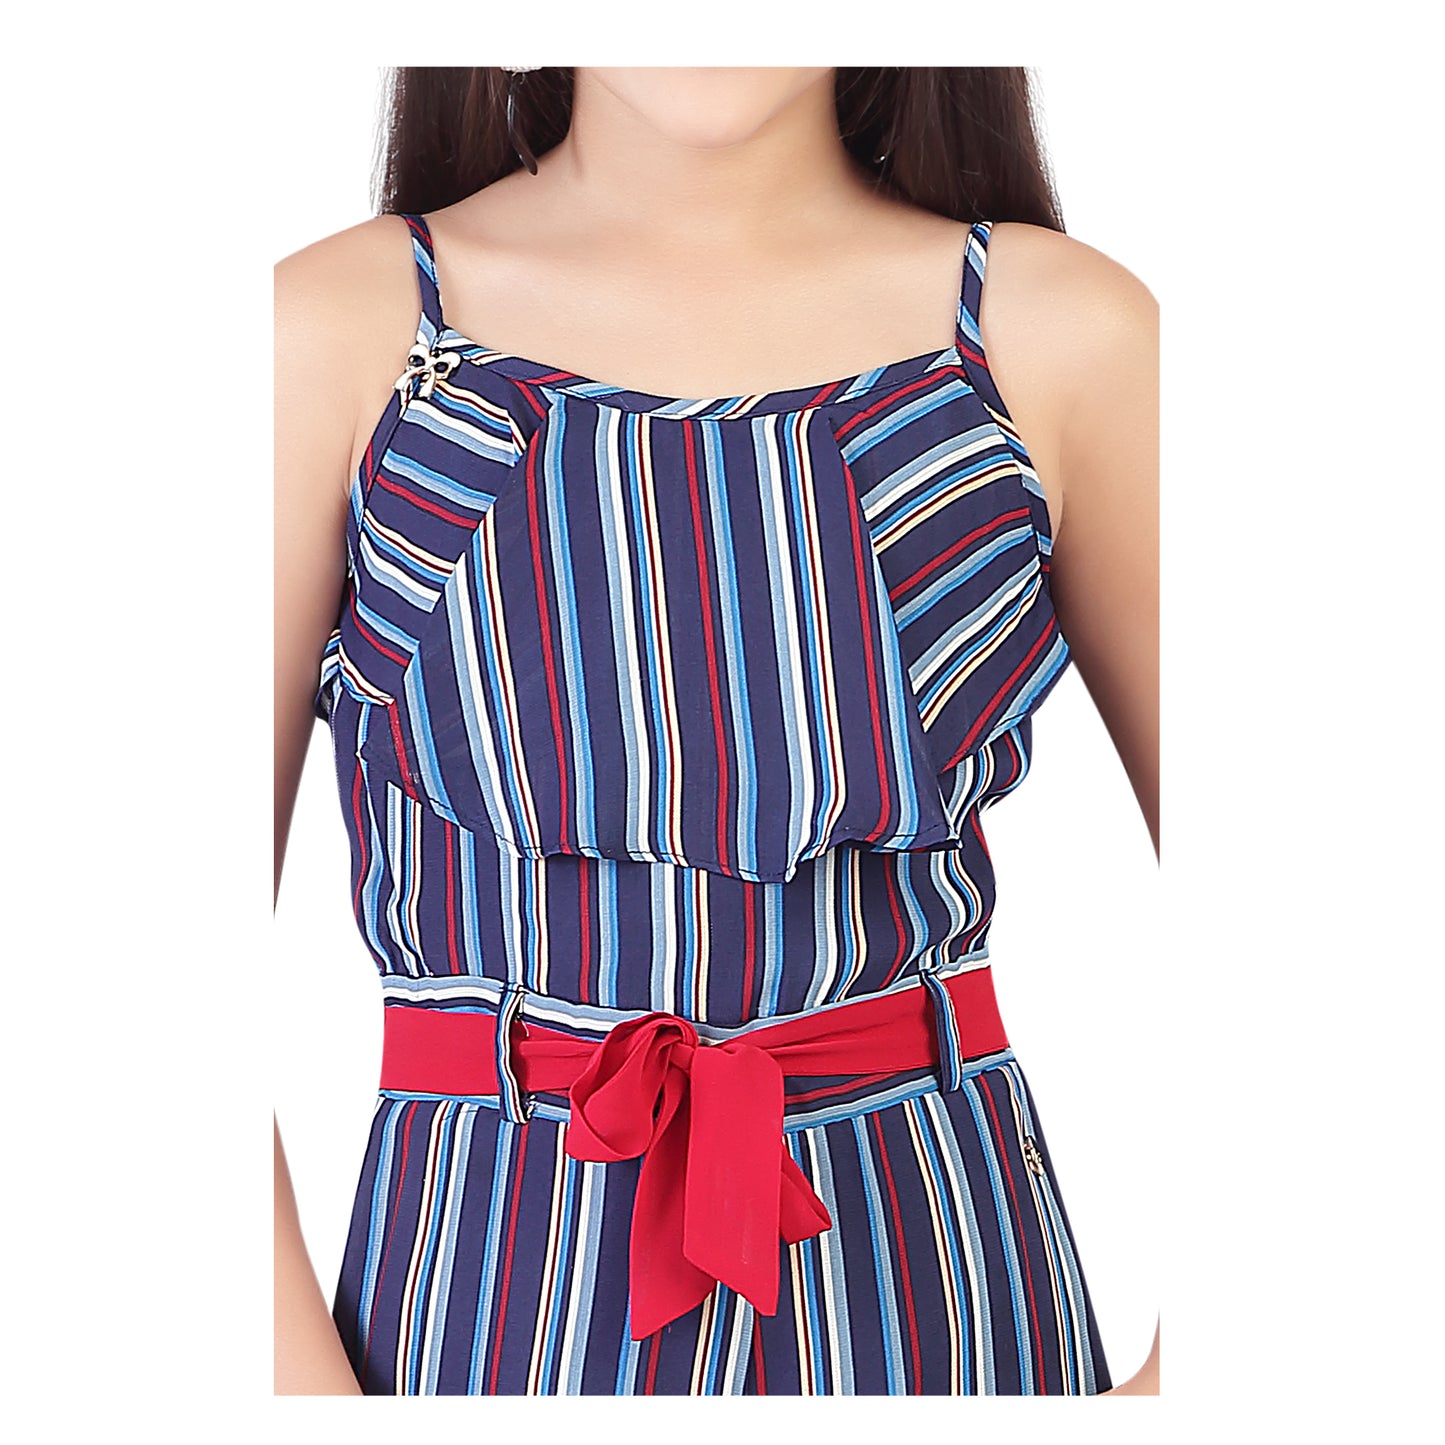 Sleeveless Jumpsuit With Stripes In Navy